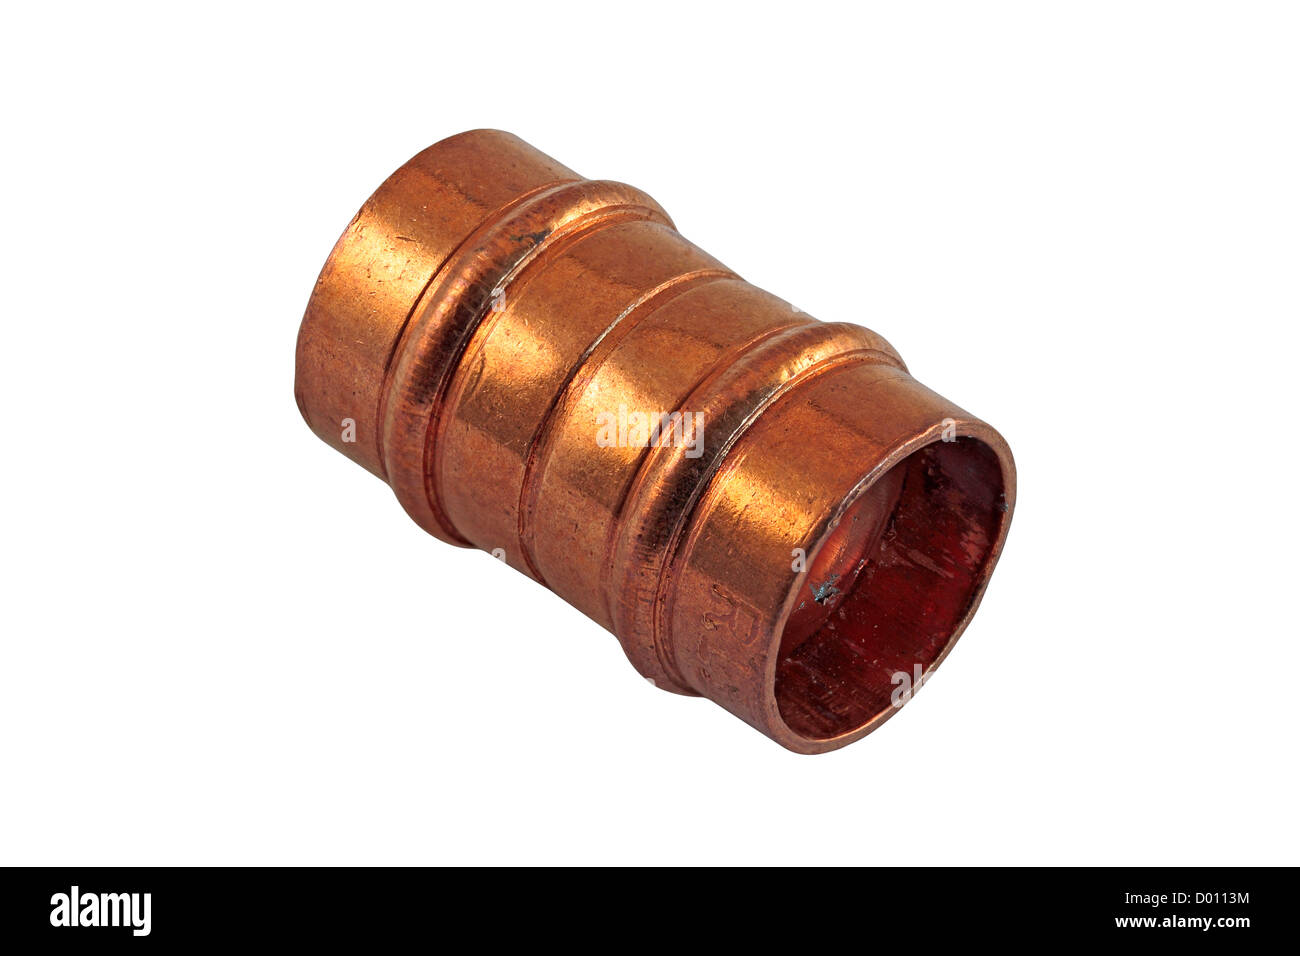 15mm Yorkshire Solder Ring Copper Straight Coupling Pipe Fitting Stock Photo